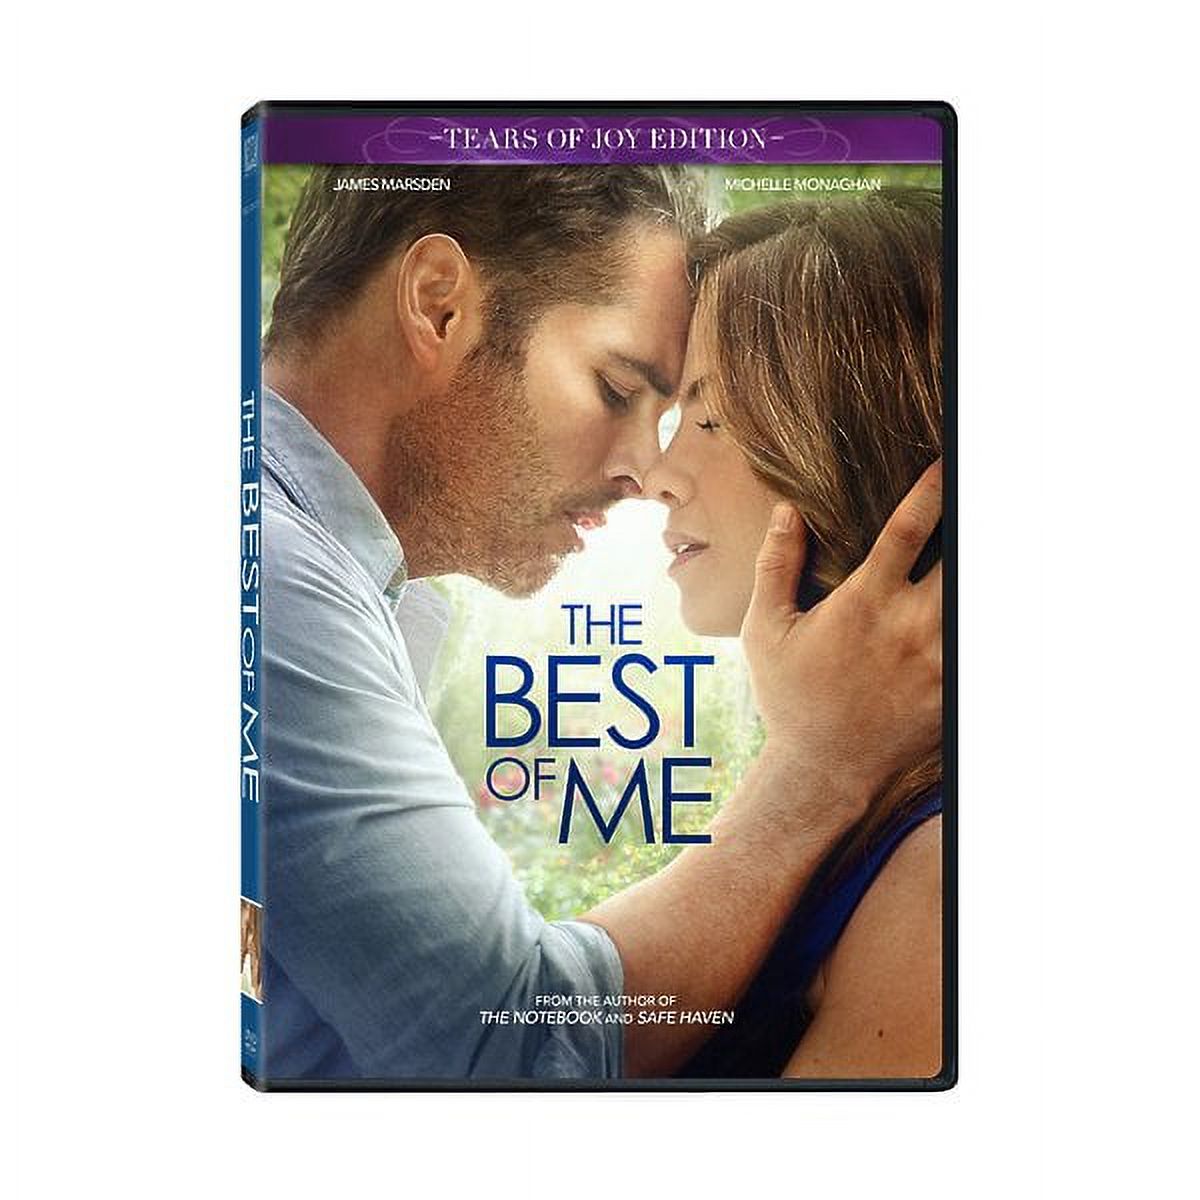 The Best of Me (DVD) - image 3 of 4